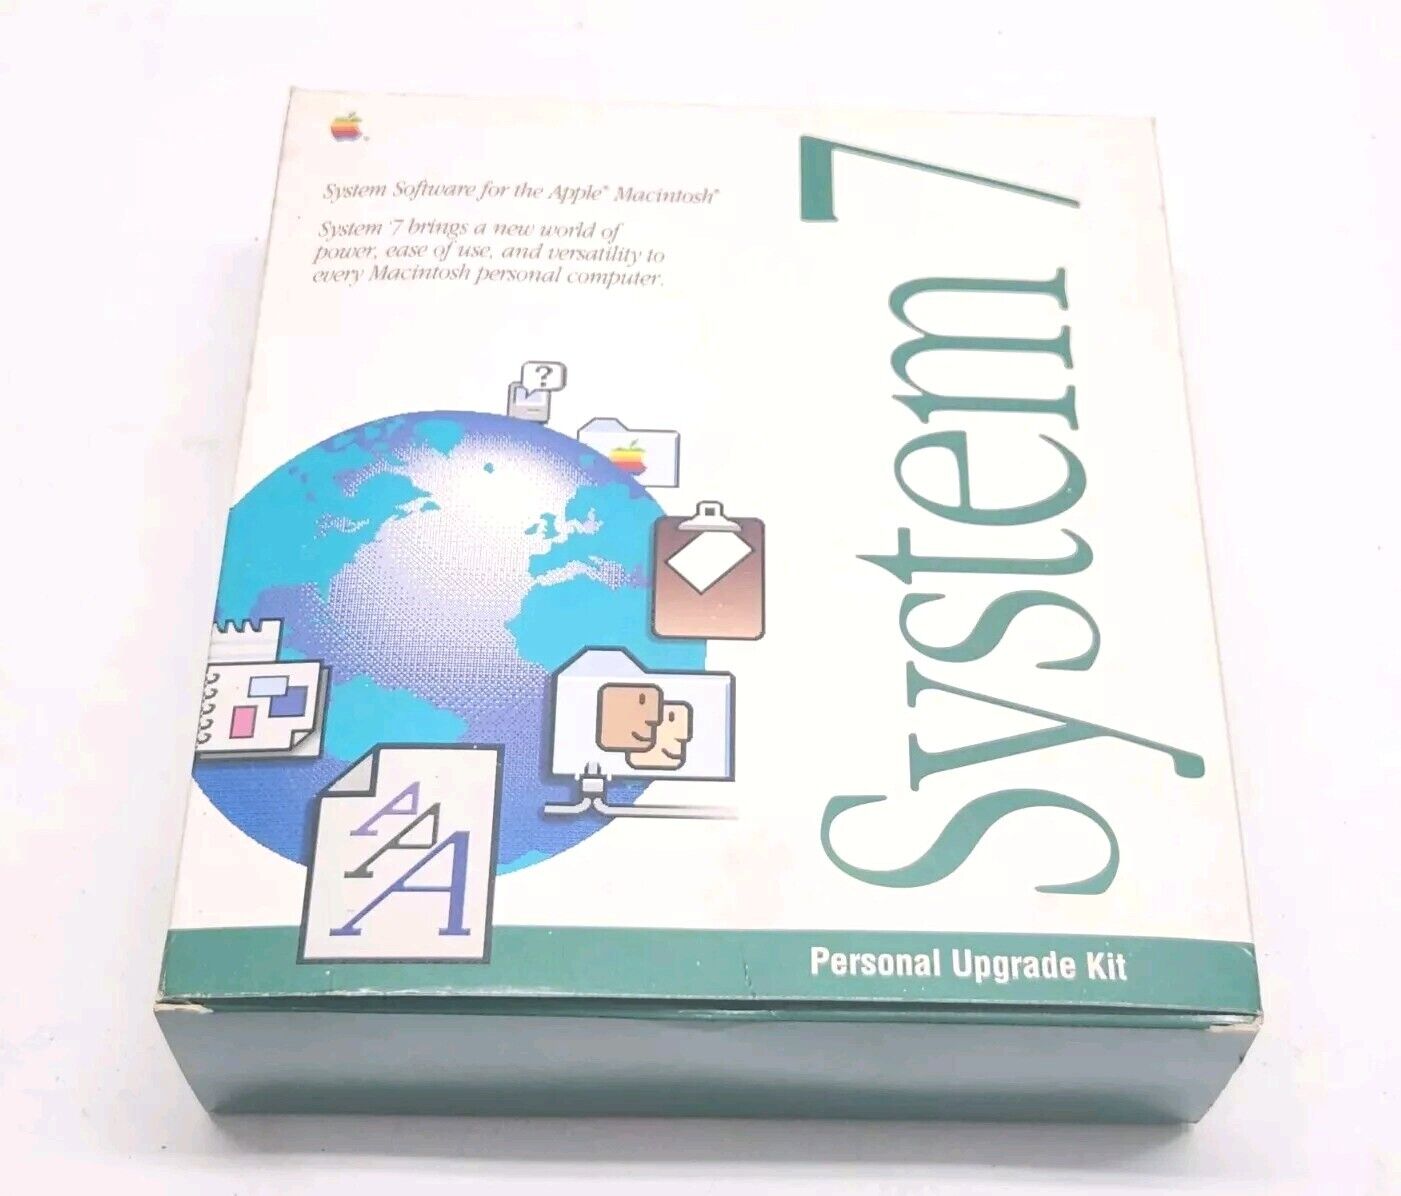 Apple Macintosh System Software 7 Personal Upgrade Kit Complete PC 1991